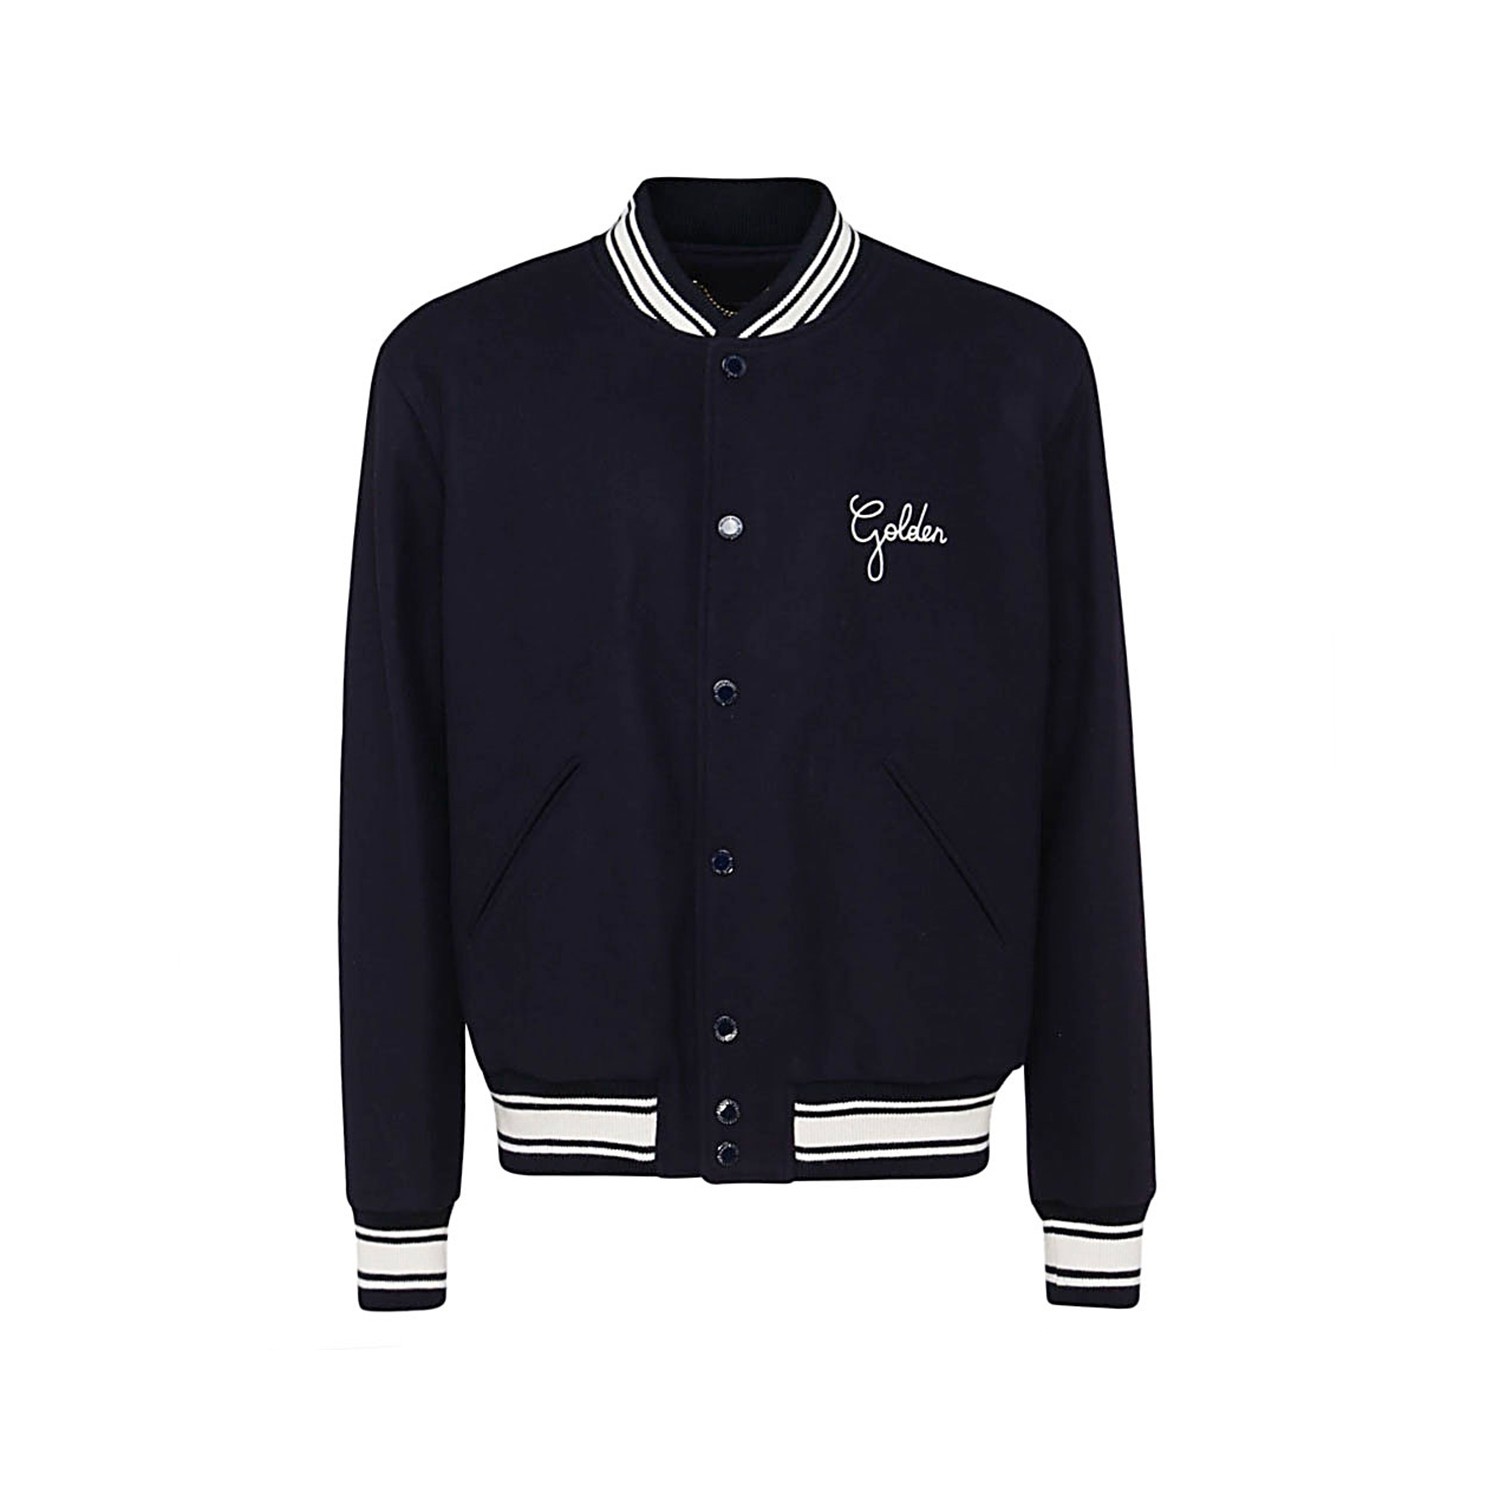 DARK BLUE AND WHITE COTTON CASUAL JACKET - 1